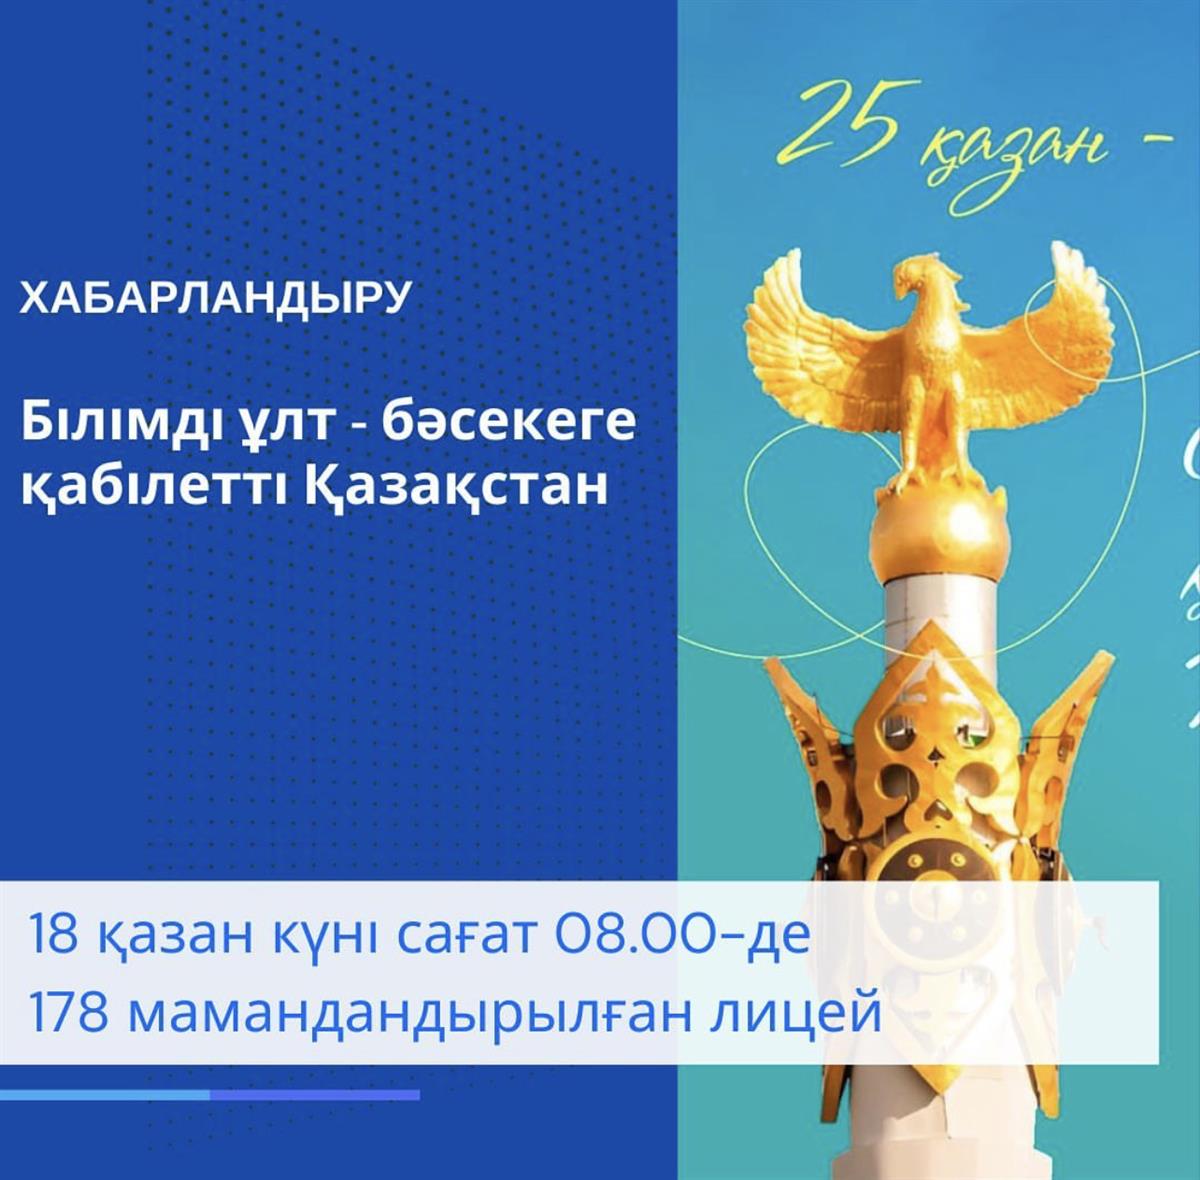 "Educated nation – Competitive Kazakhstan" 